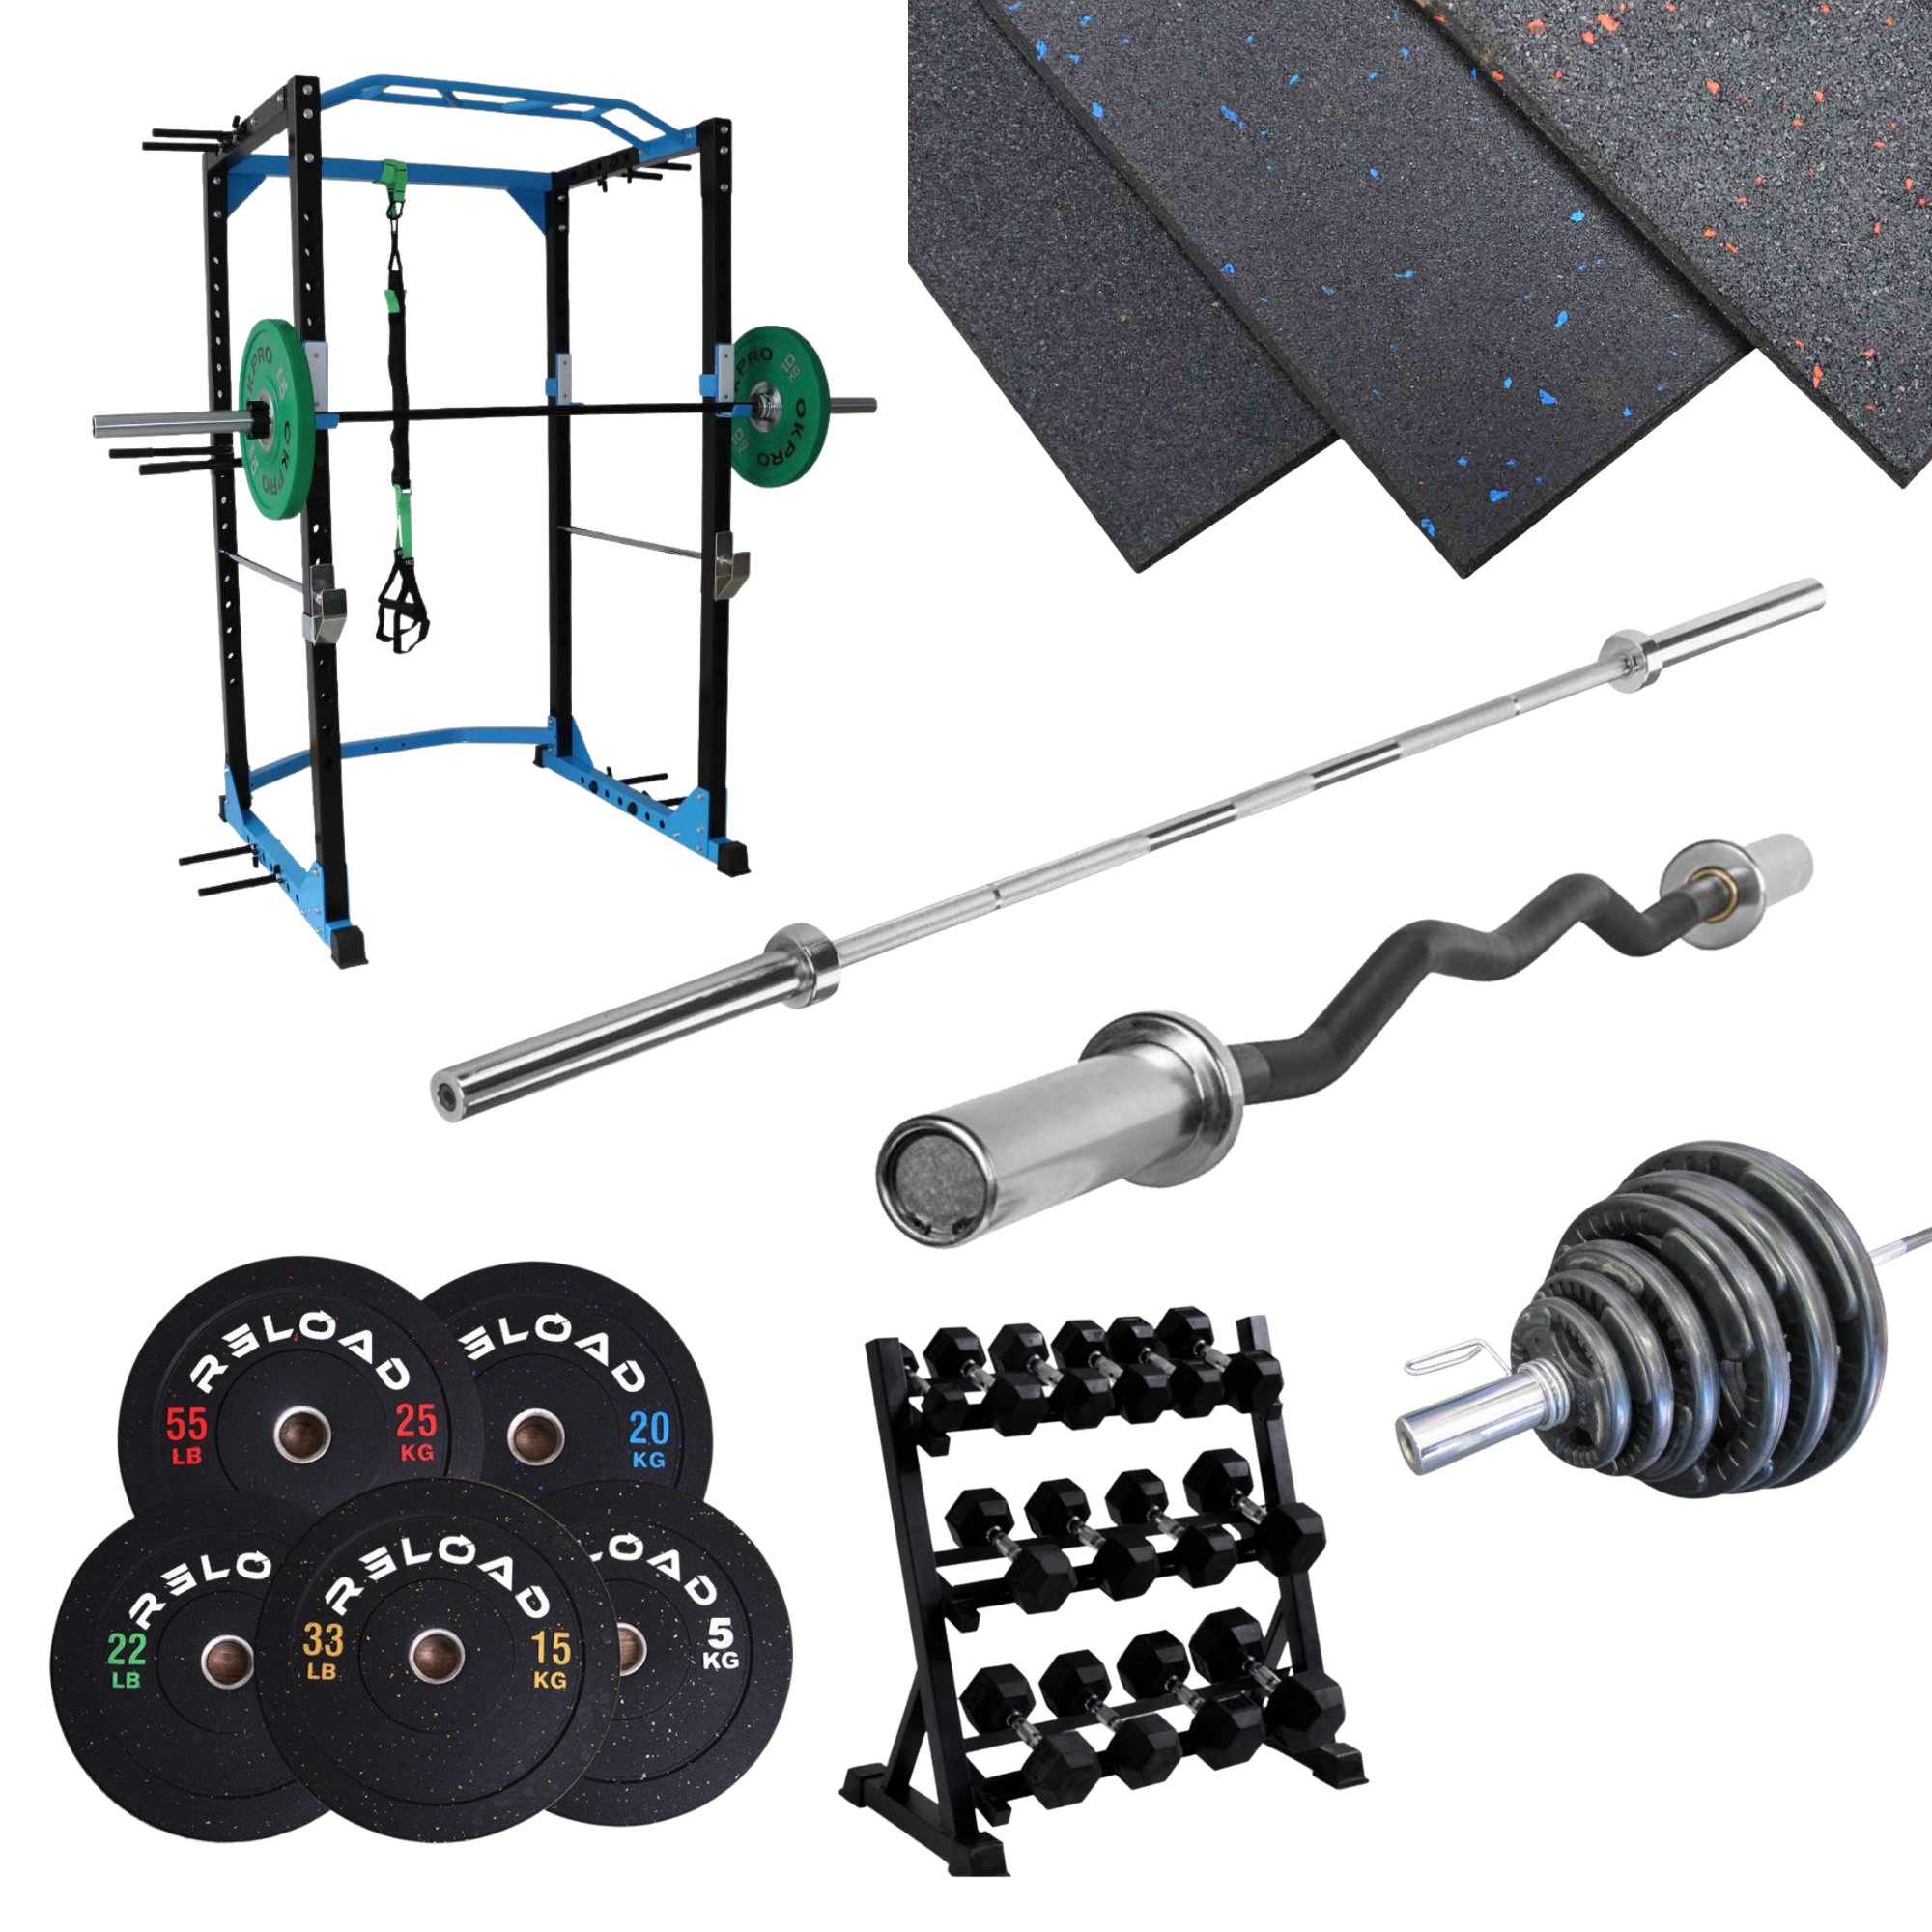 Power Cage & Bumper Plate Garage / Home Gym Bundle [Package 10] | Arrives May - Fitness Hero Brand new